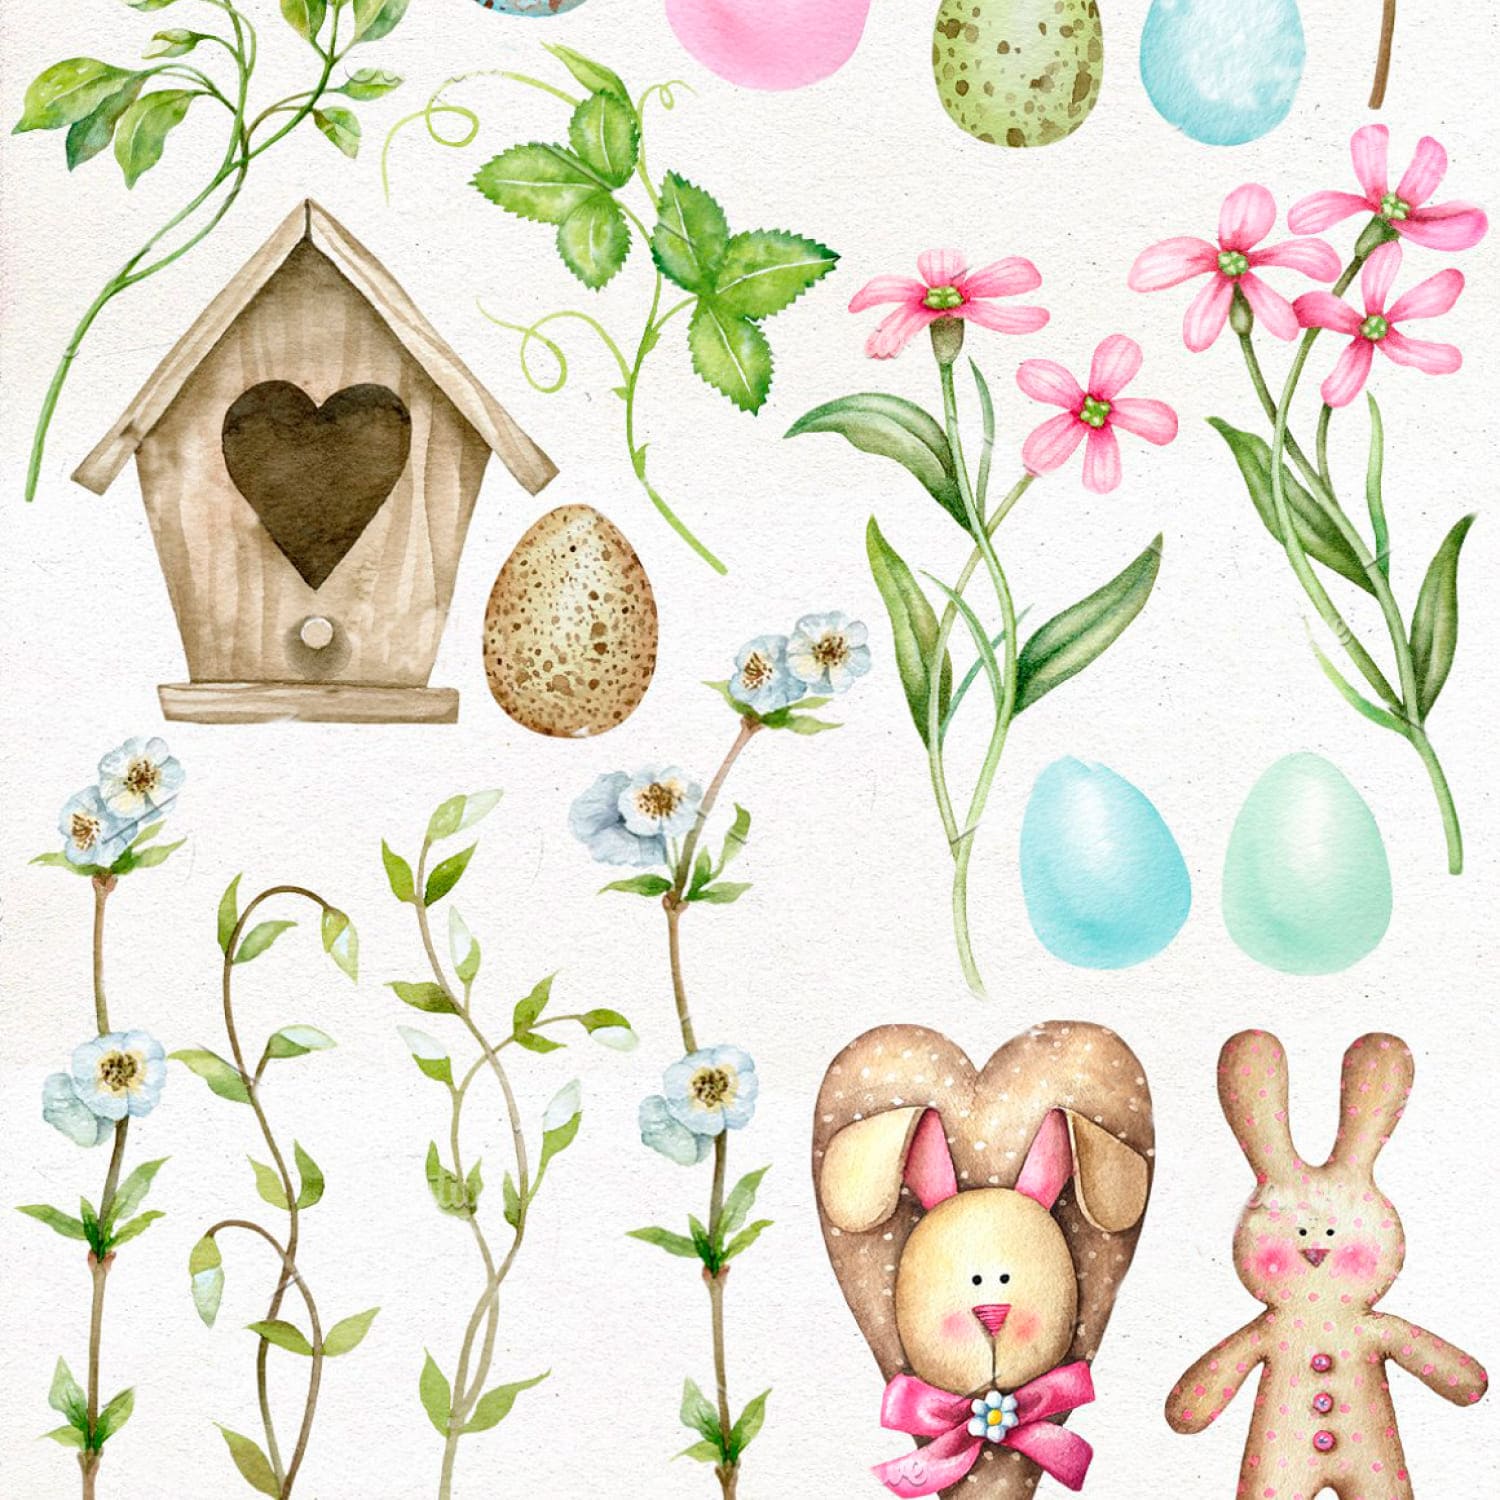 Watercolor Easter decor clipart, second picture 1500x1500.